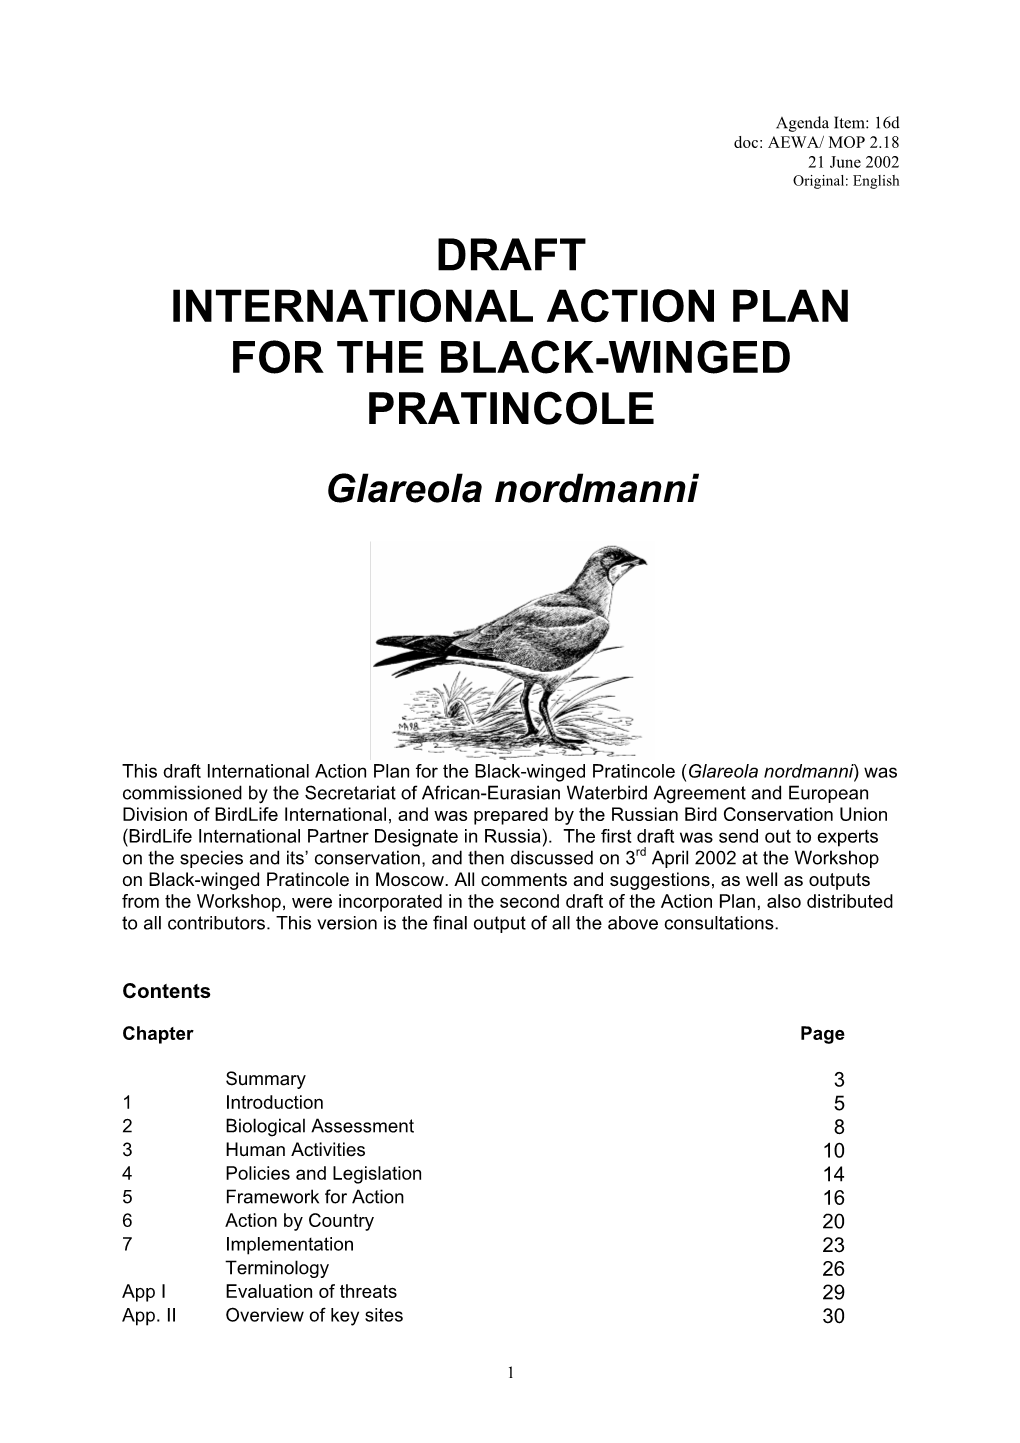 Draft International Action Plan for the Black-Winged Pratincole